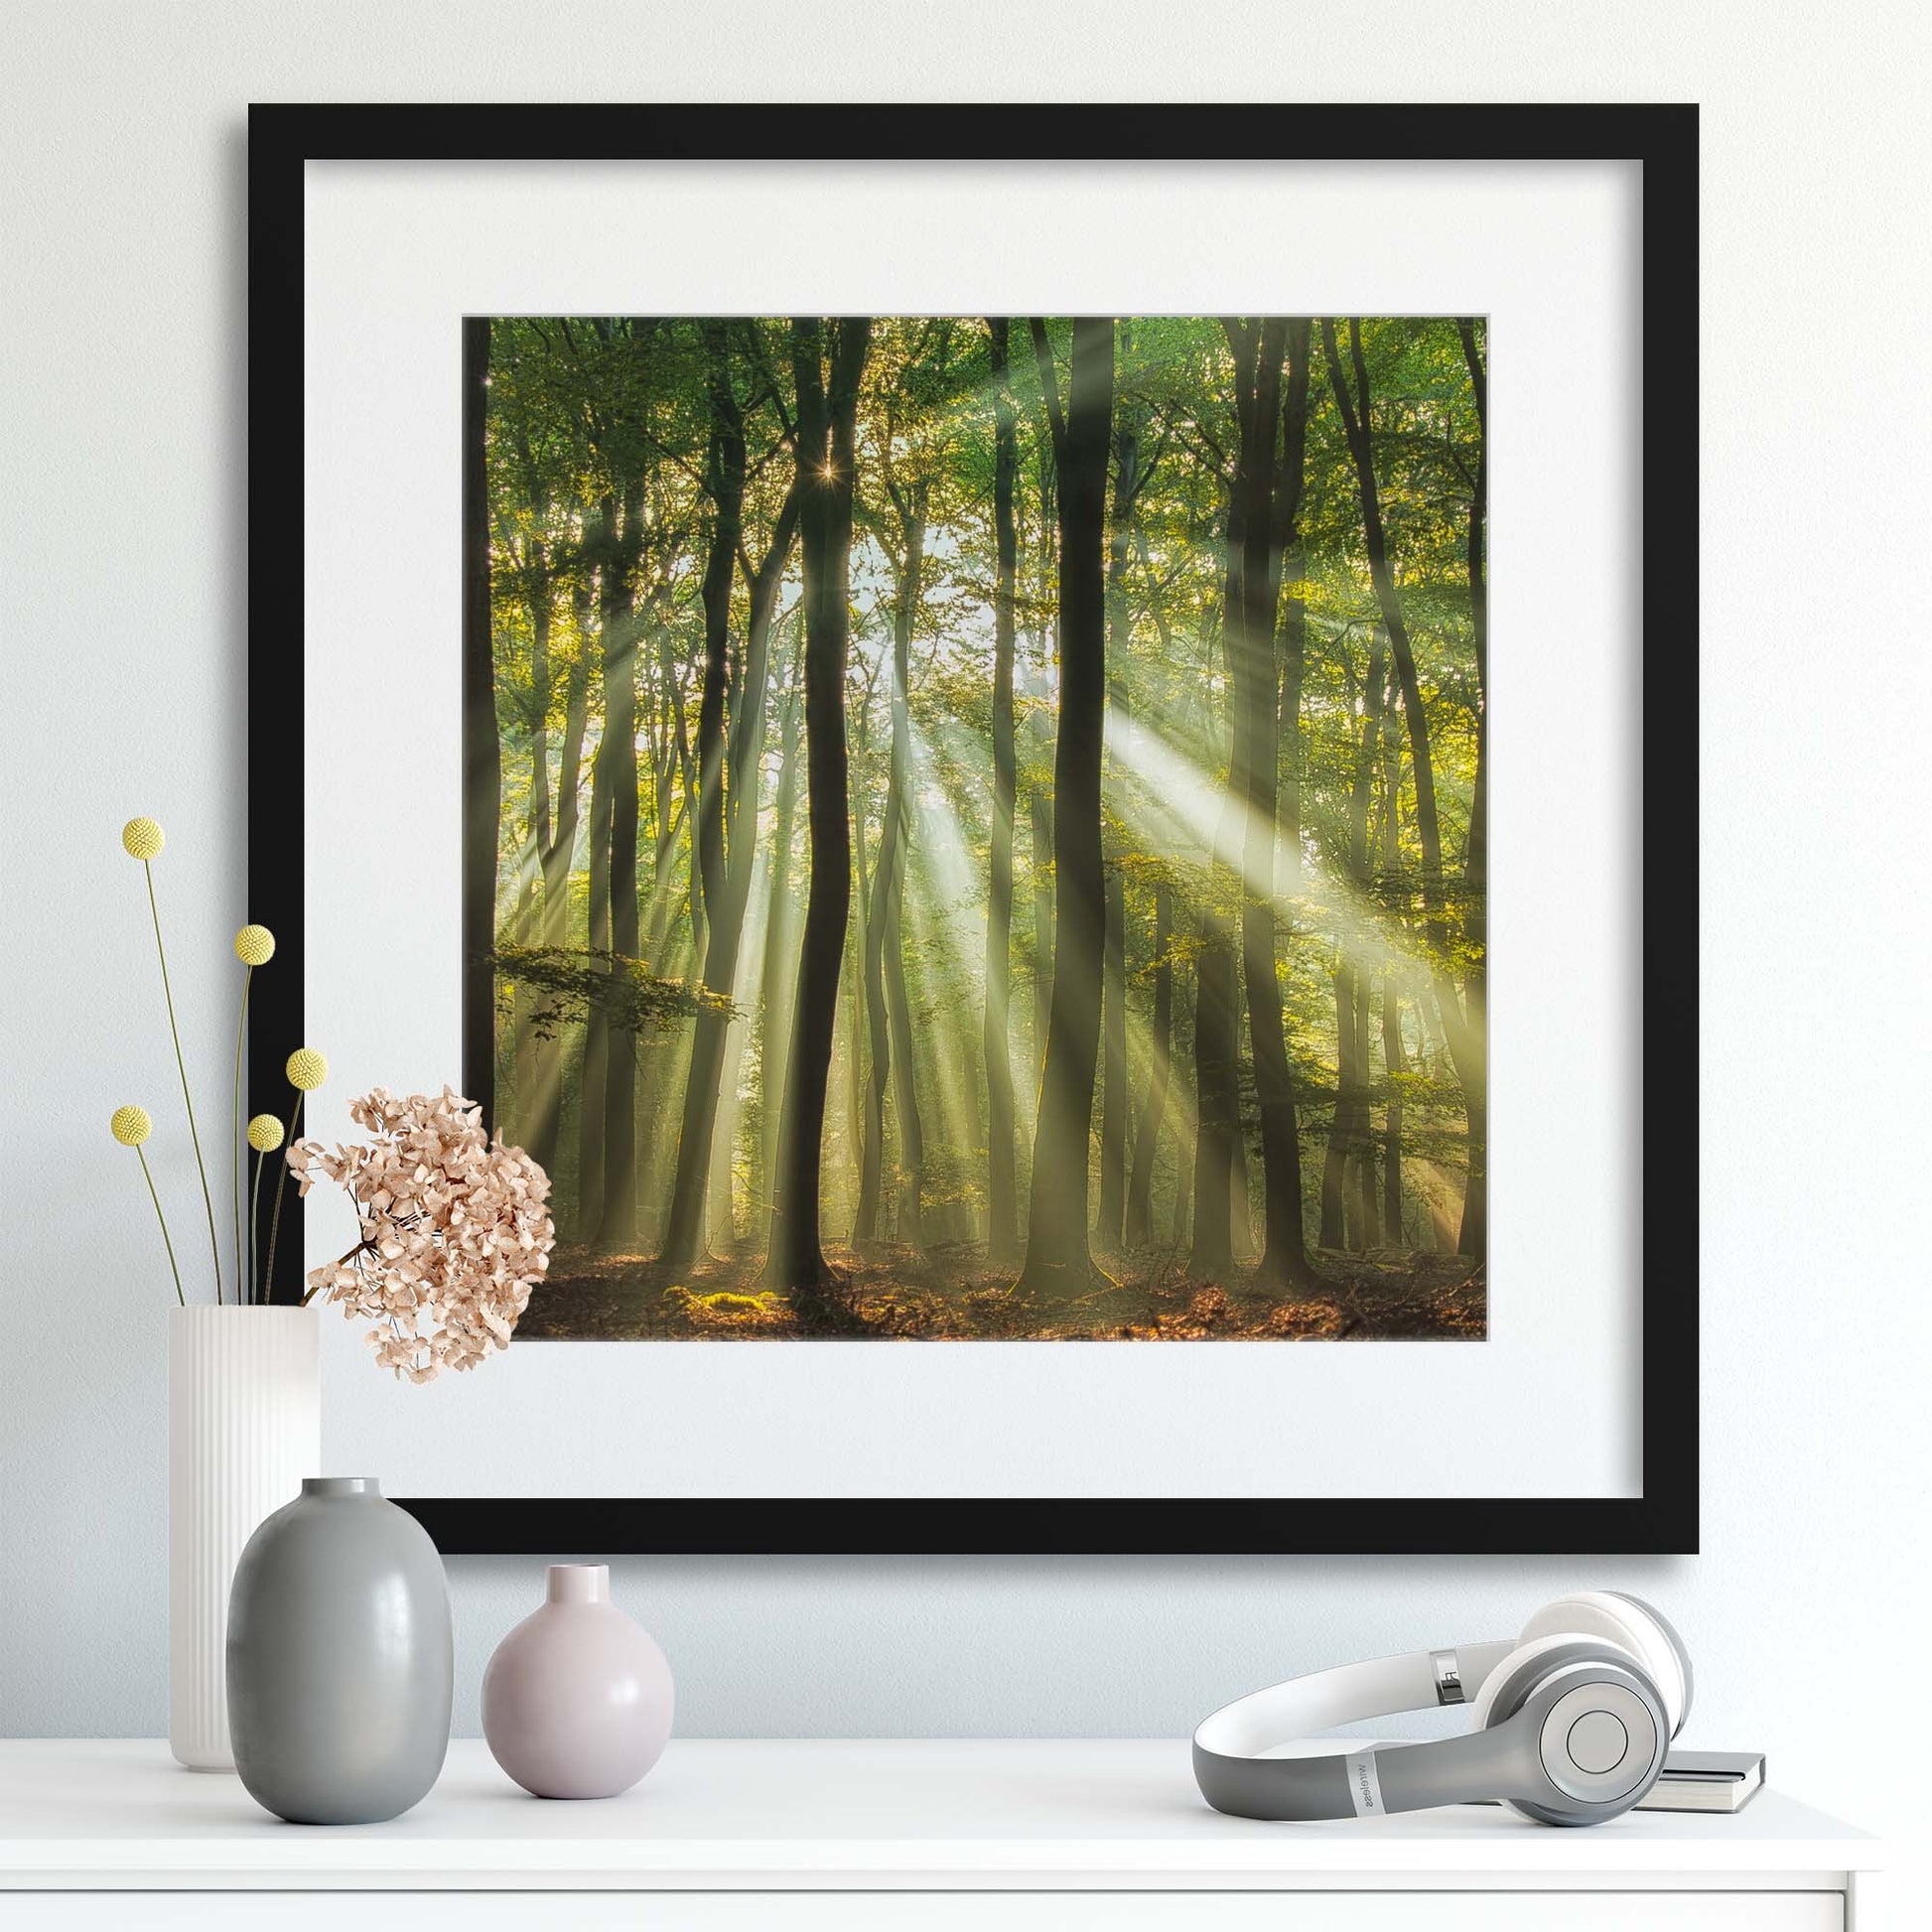 Sunny Start to the Day by Piet Haaksma Framed Print - USTAD HOME